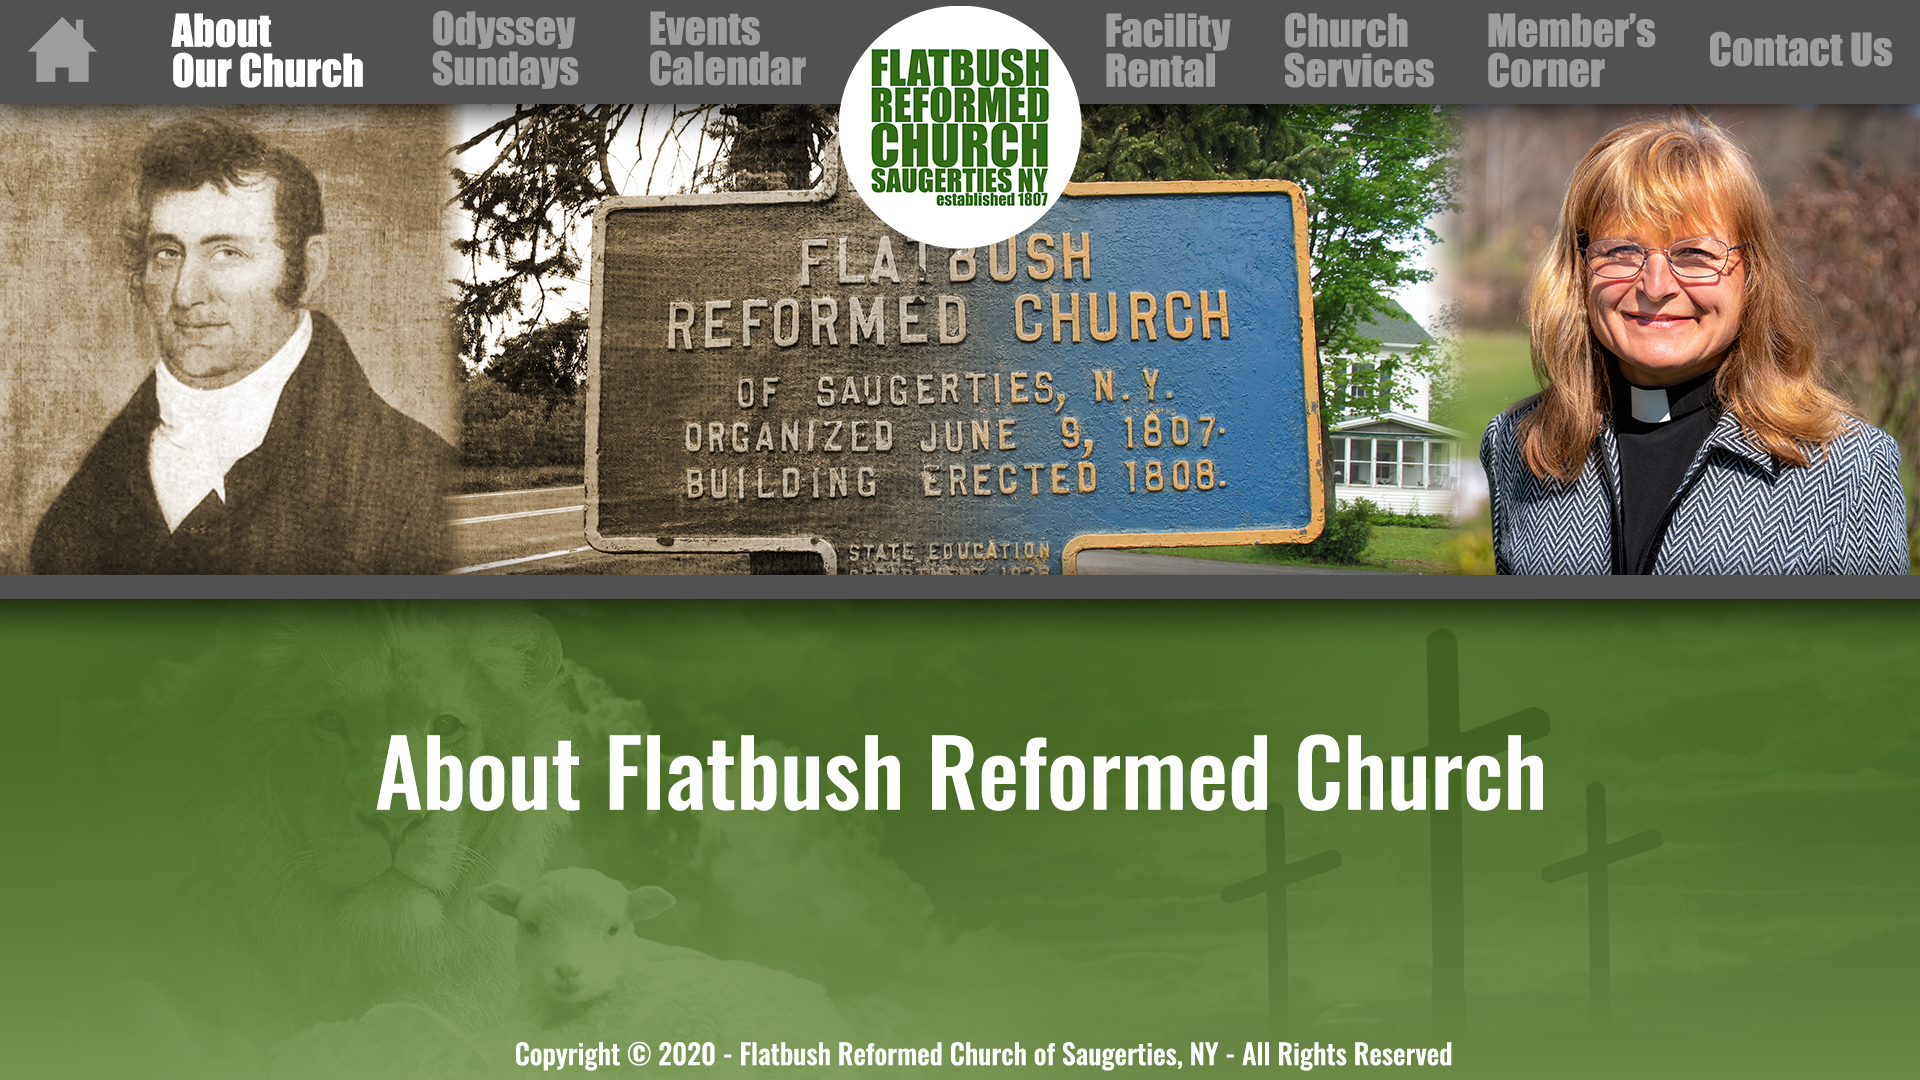 About Flatbush Reformed Church of Saugerties